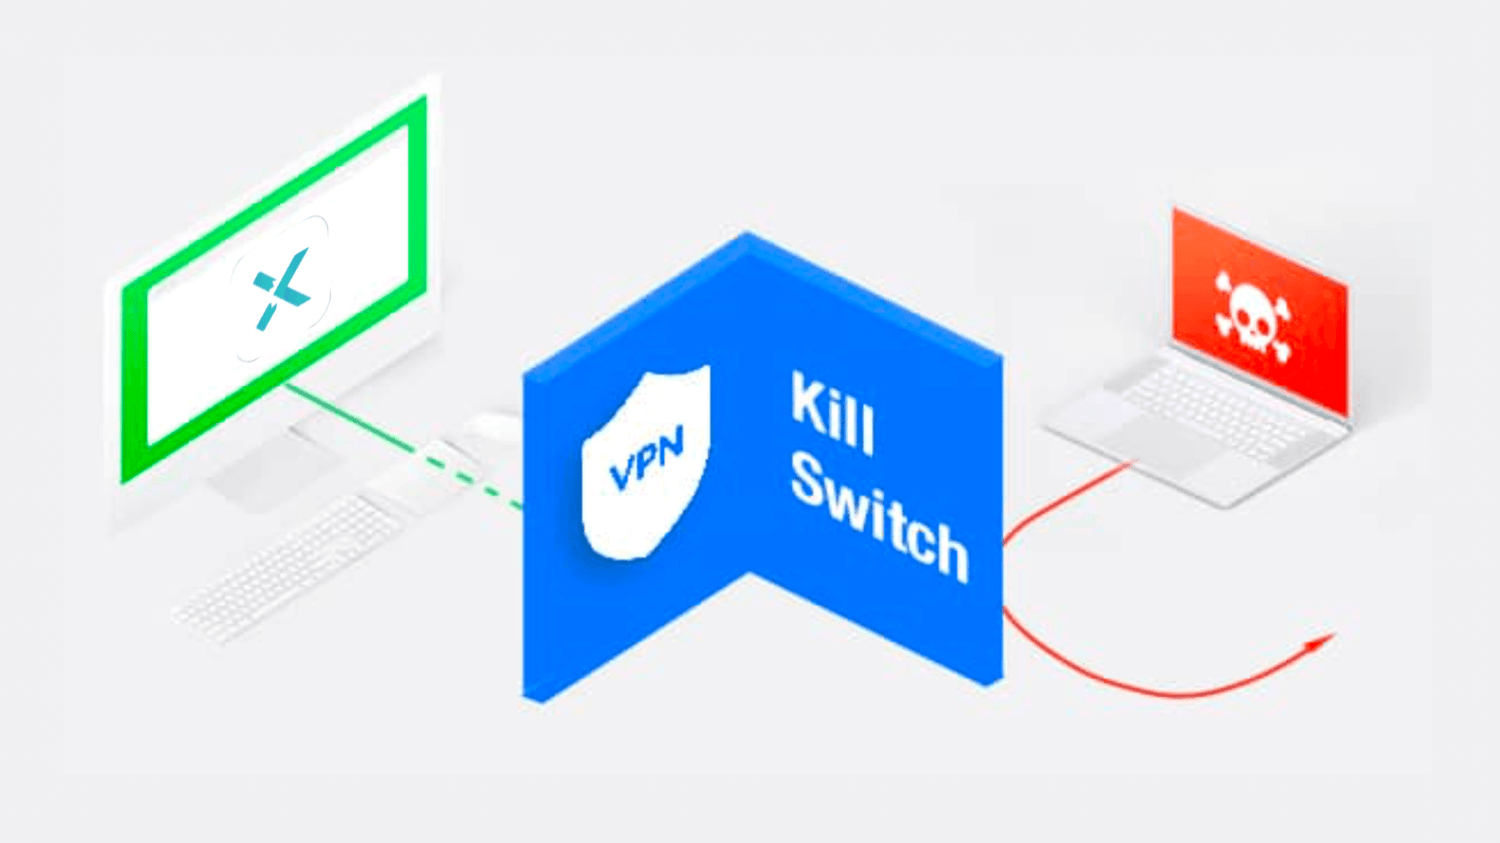 What is a VPN kill switch?